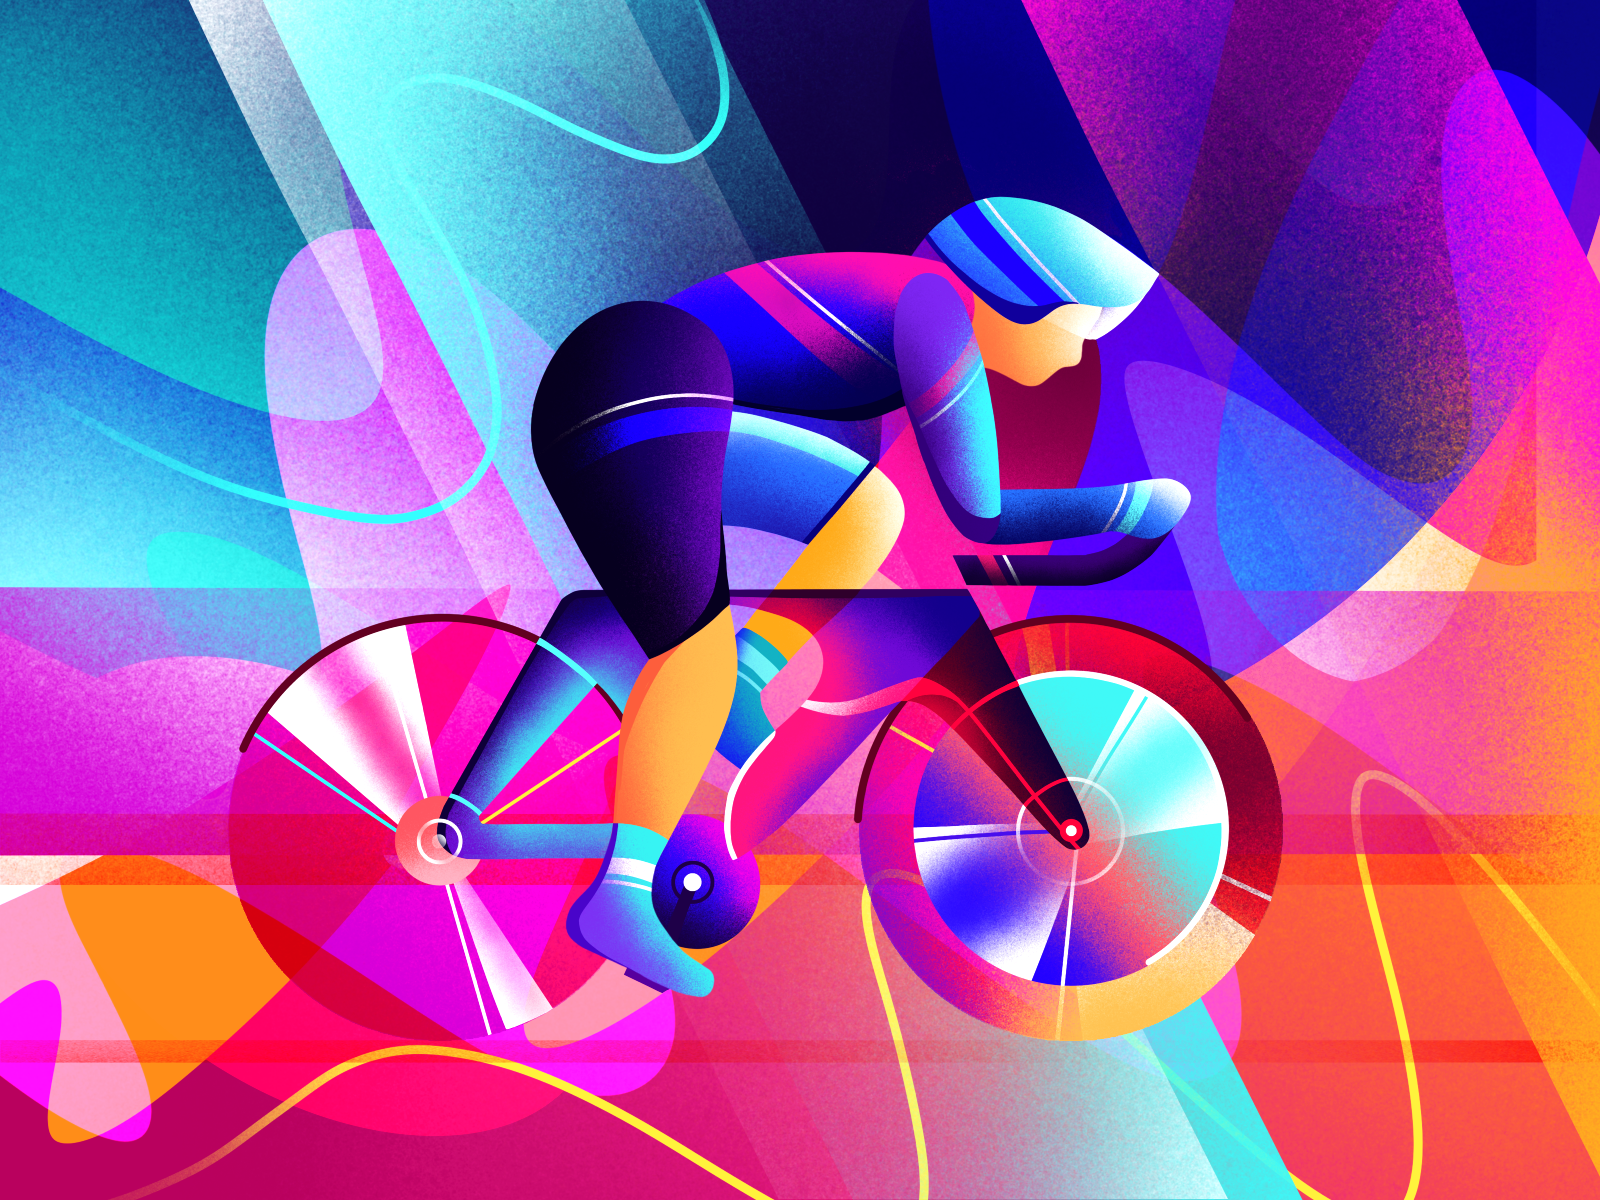 Olympic Games Tokyo 2020???? athlete sportsman sports olympic games tokyo colorful cycling bike neon bright procreate illustration olympics